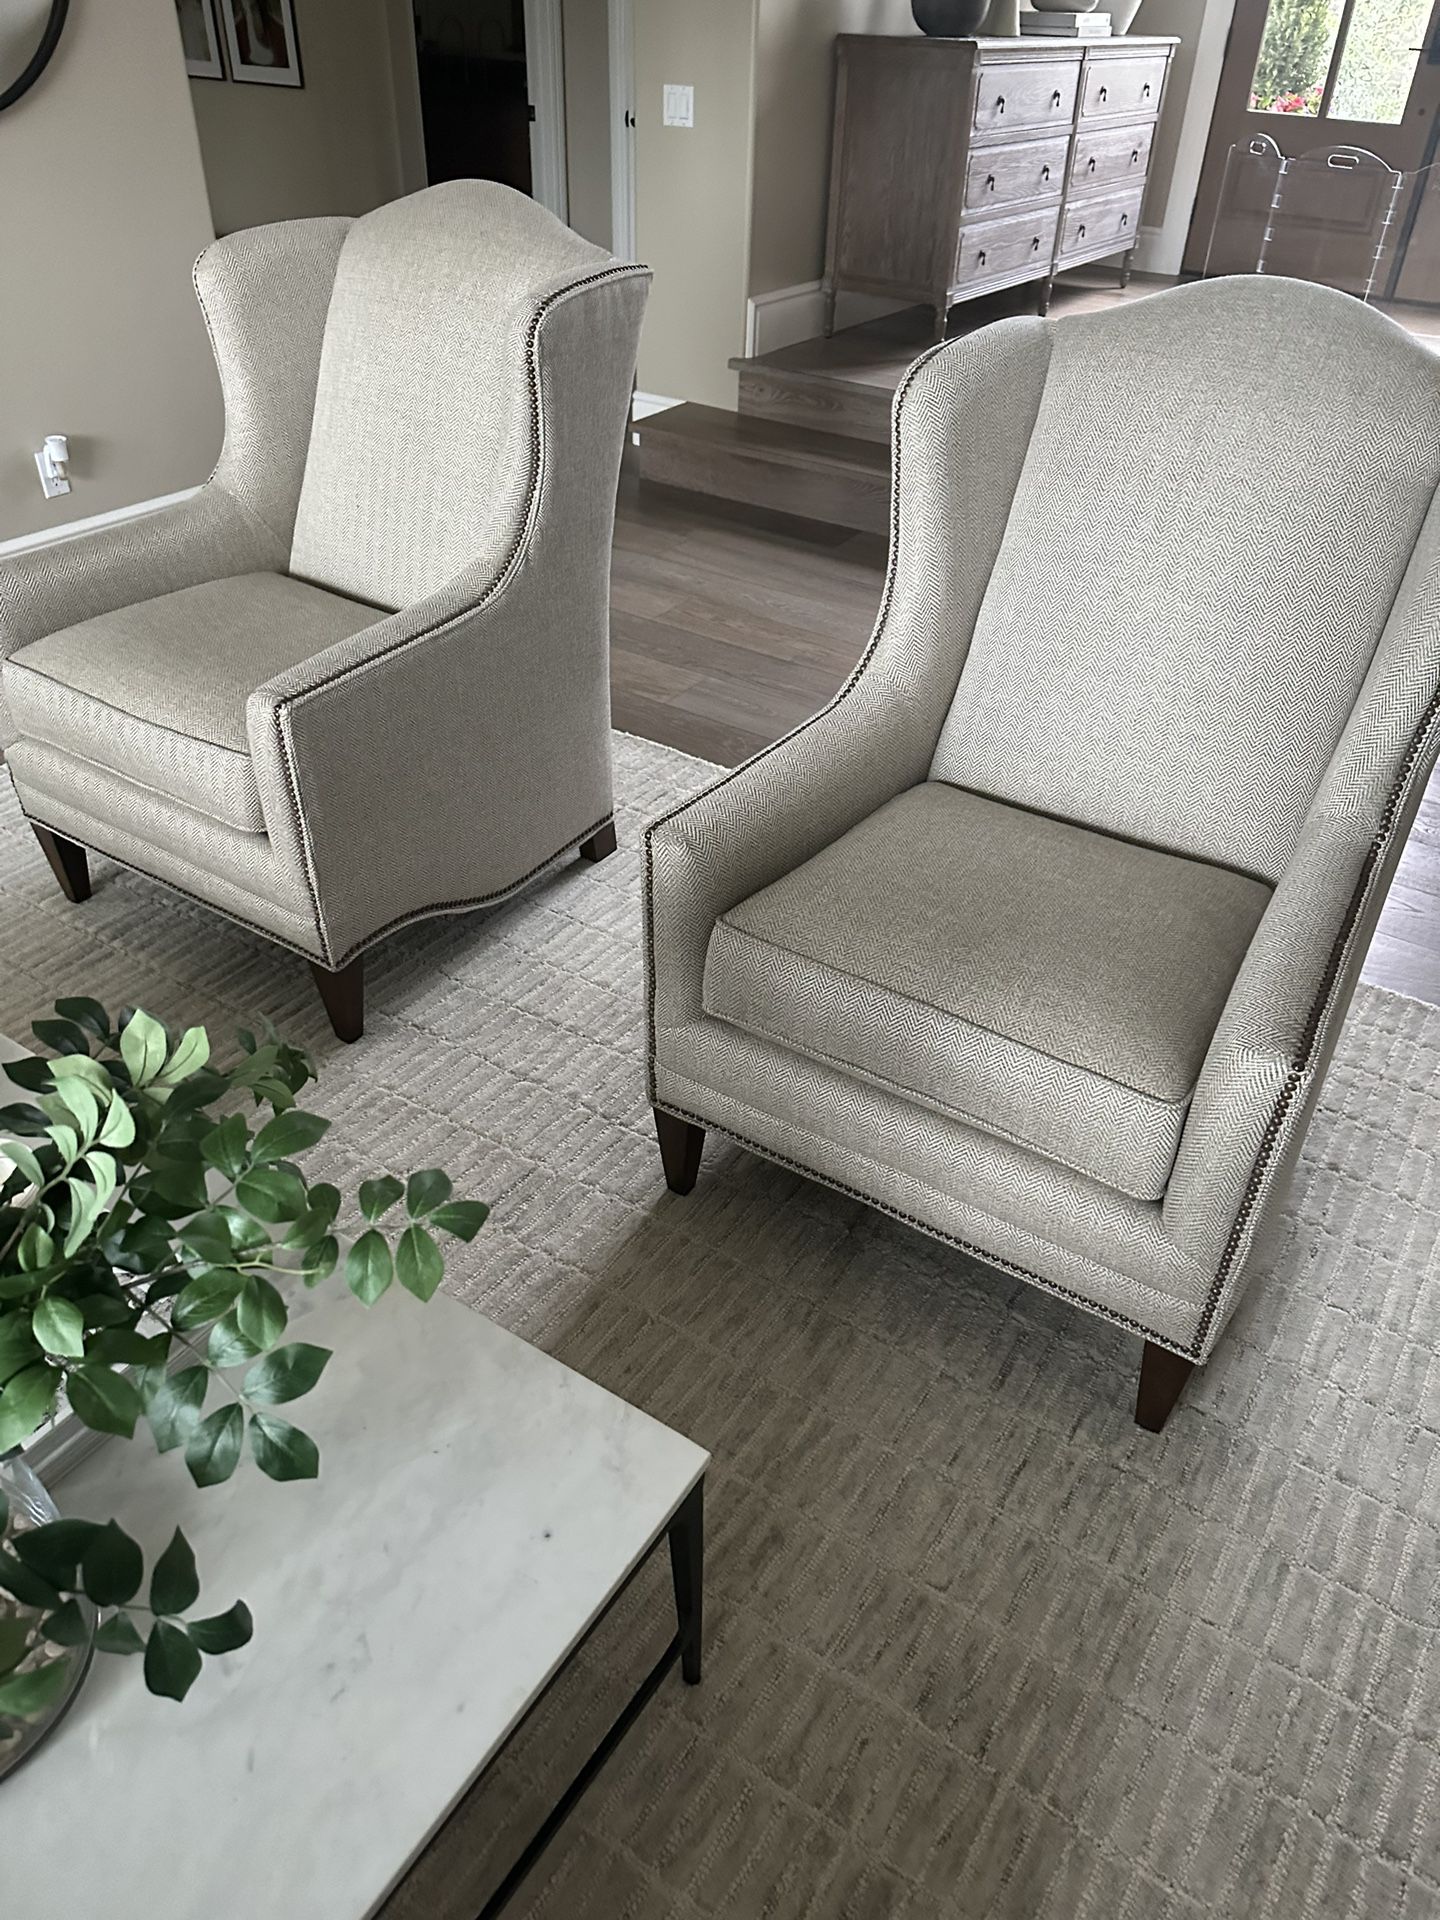 4 Matching Wingback Chairs With Modern Arm W/nailheads